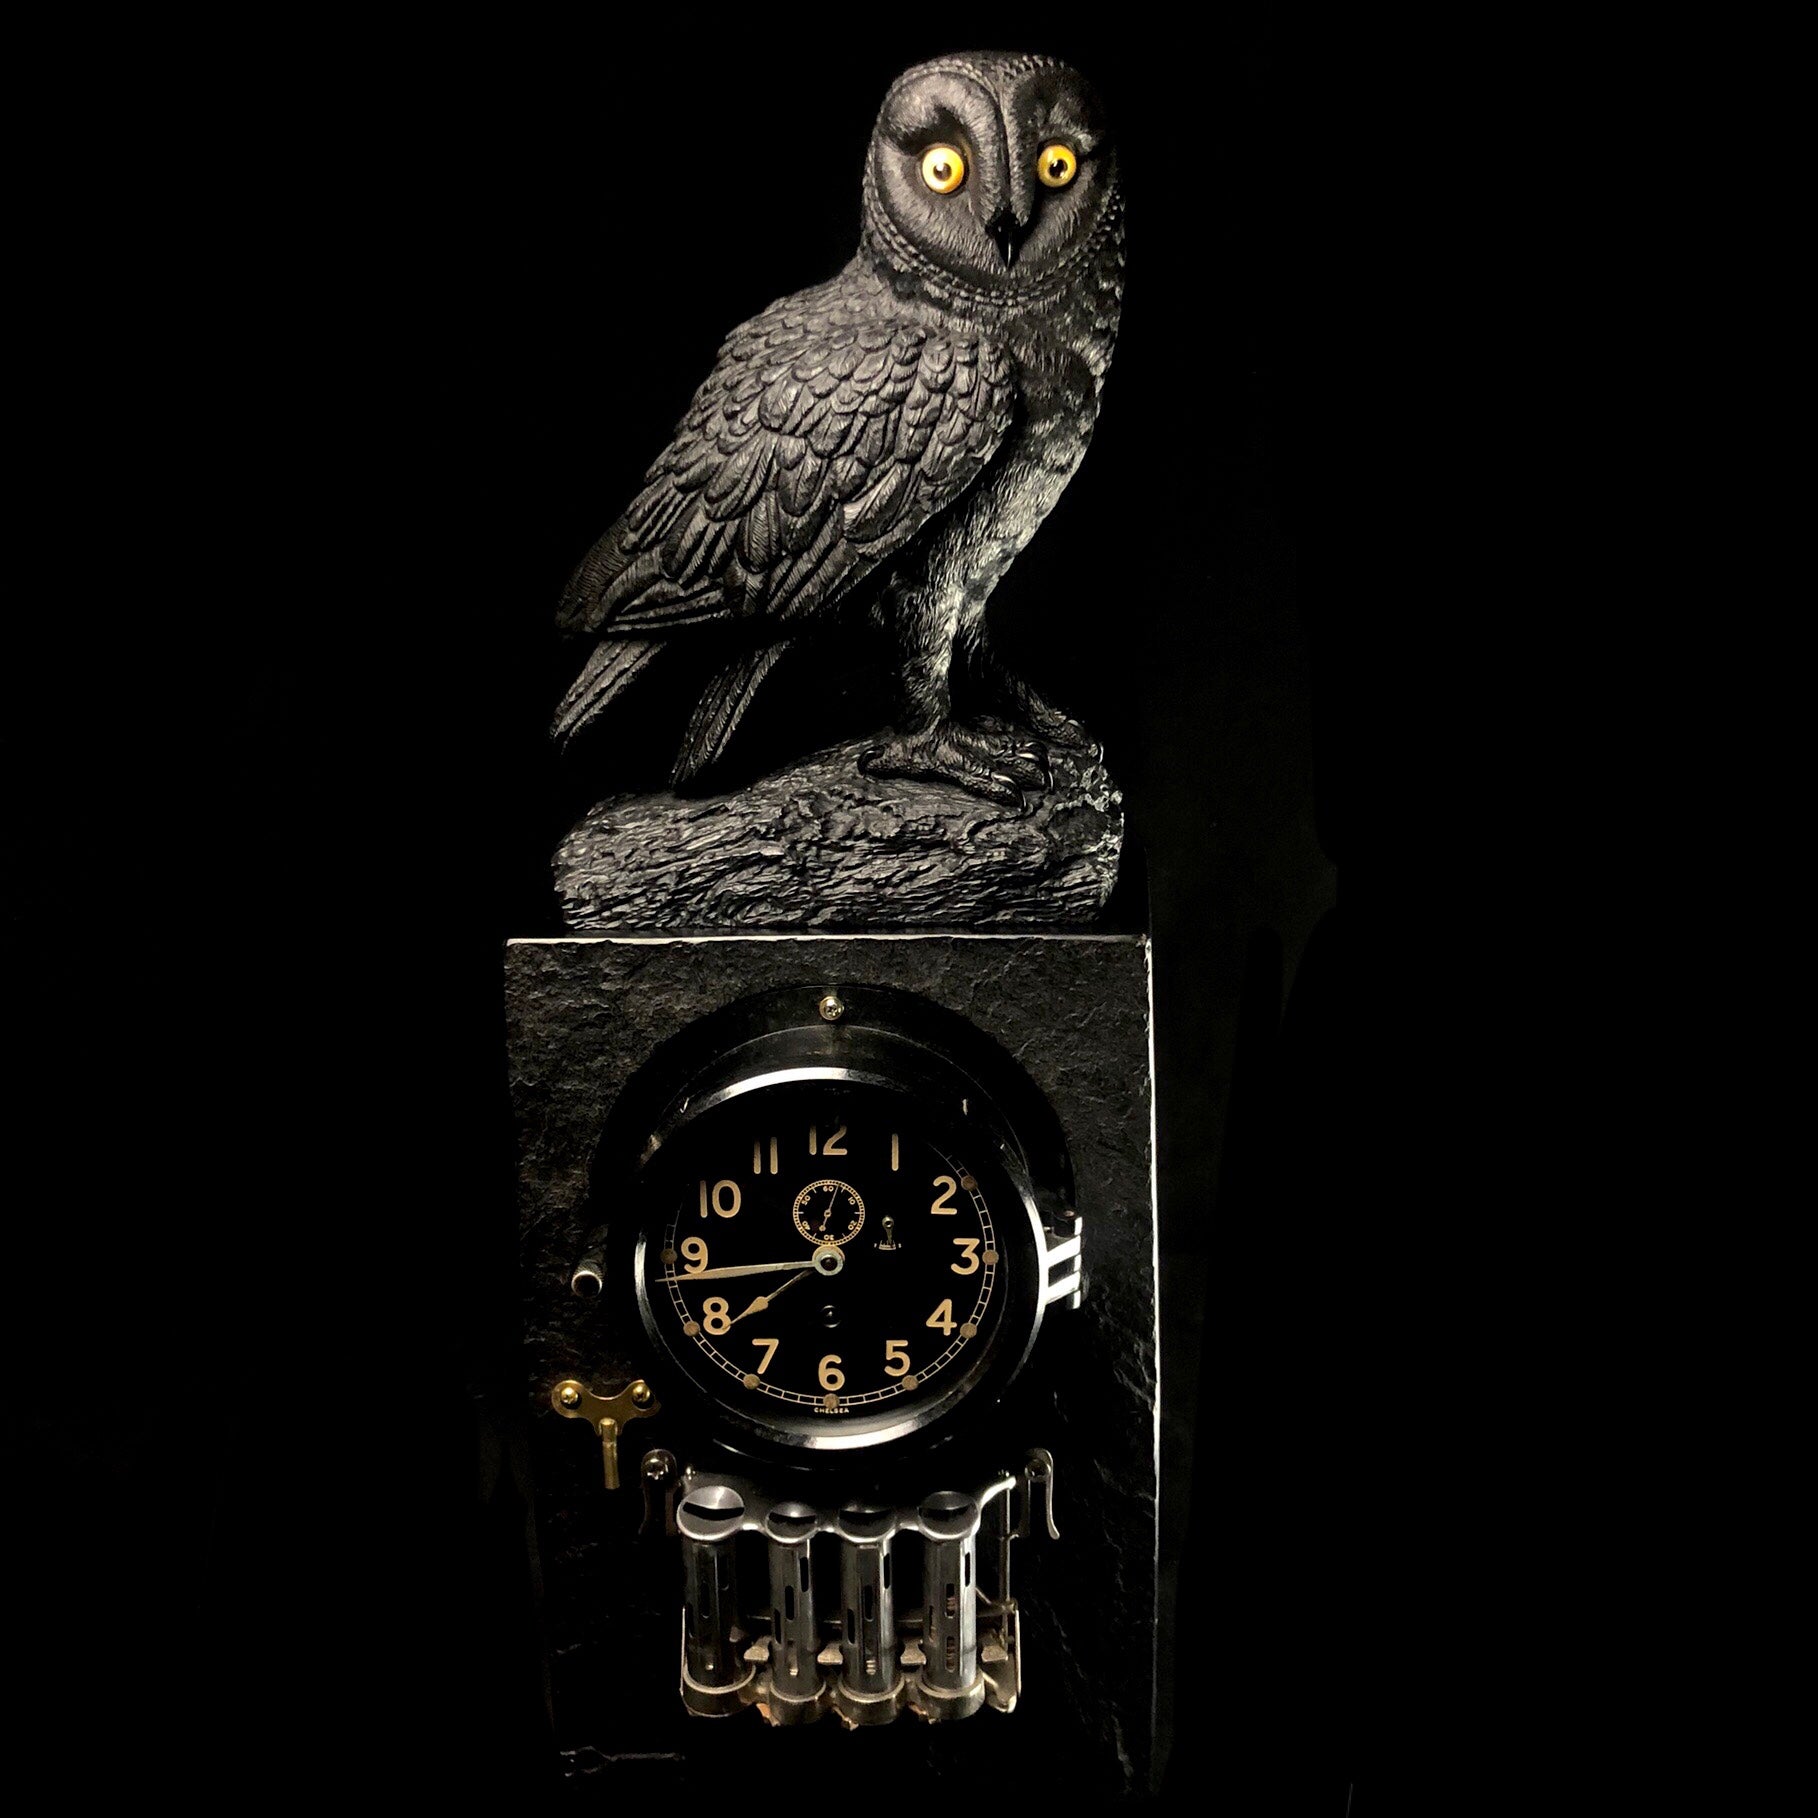 Front view of Wisdom, Time and Change Owl Jet Carving